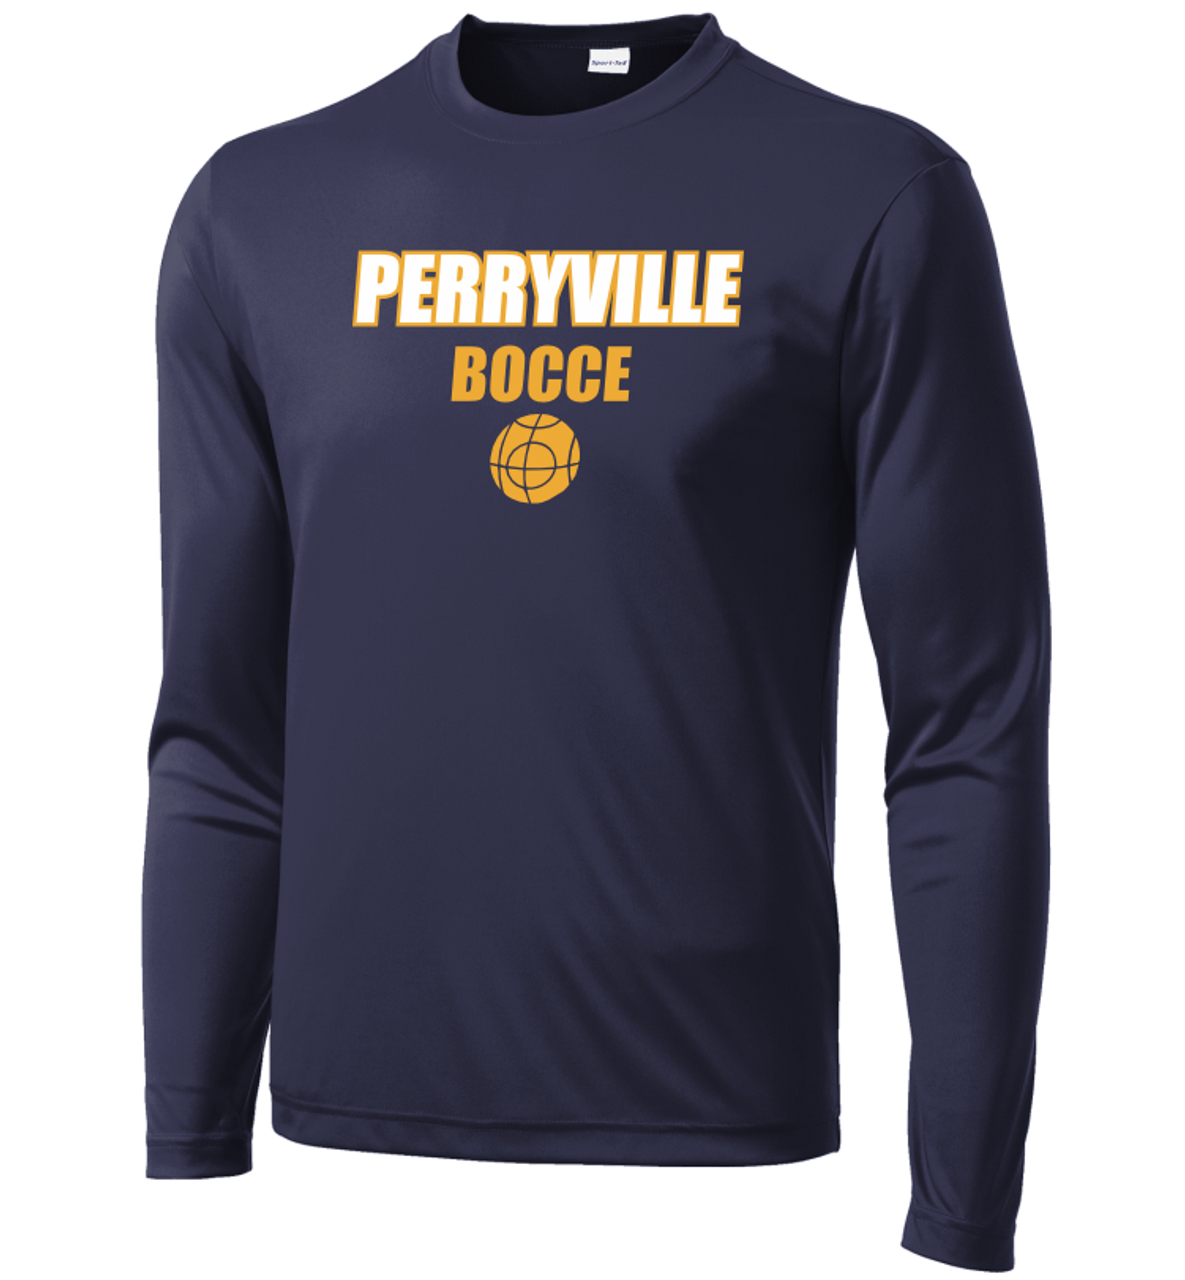 Perryville MS Bocce Performance Tee